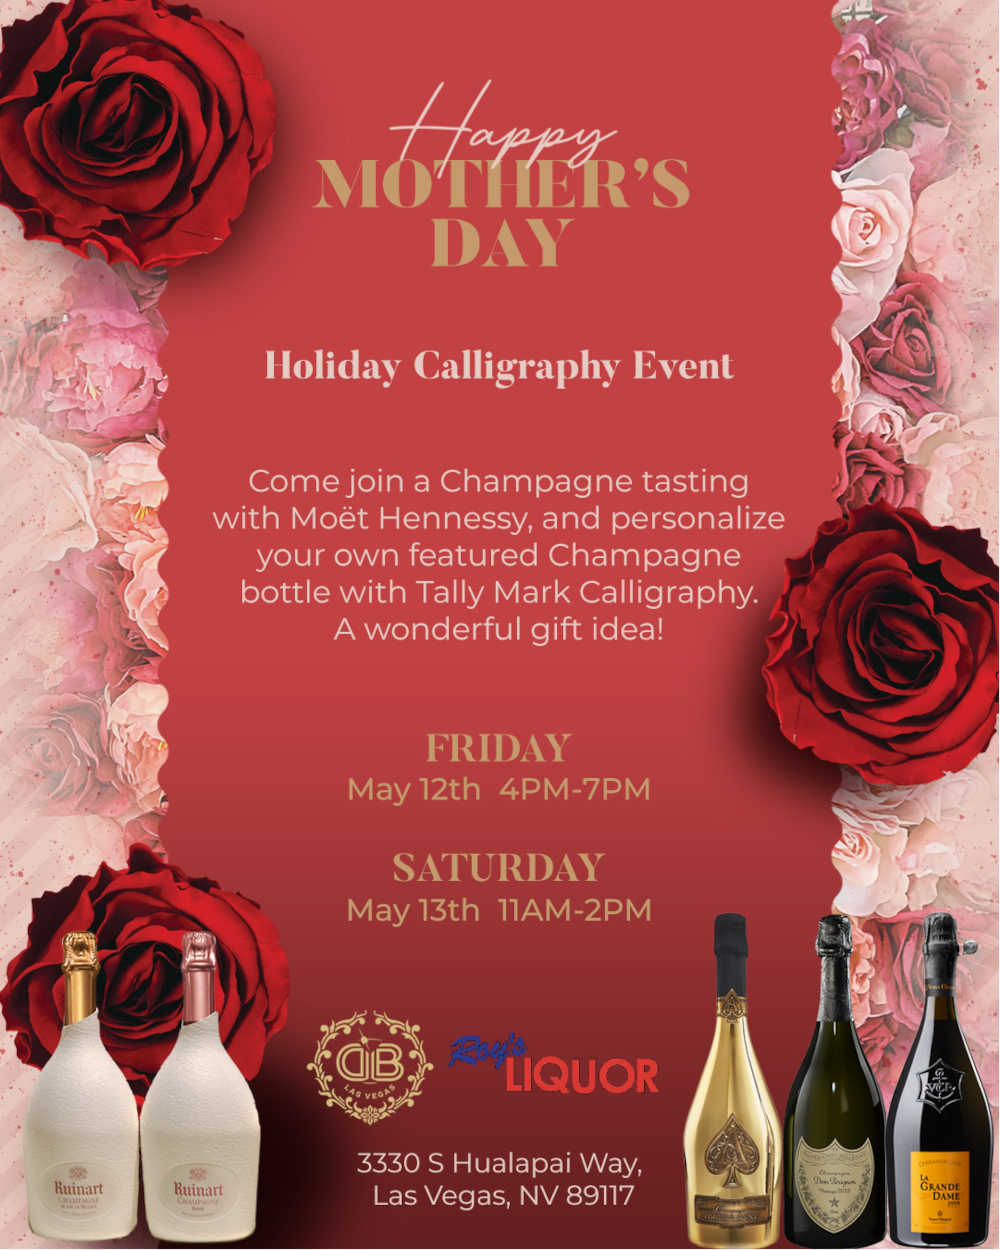 Happy Mothers Day - Holiday Calligraphy Event